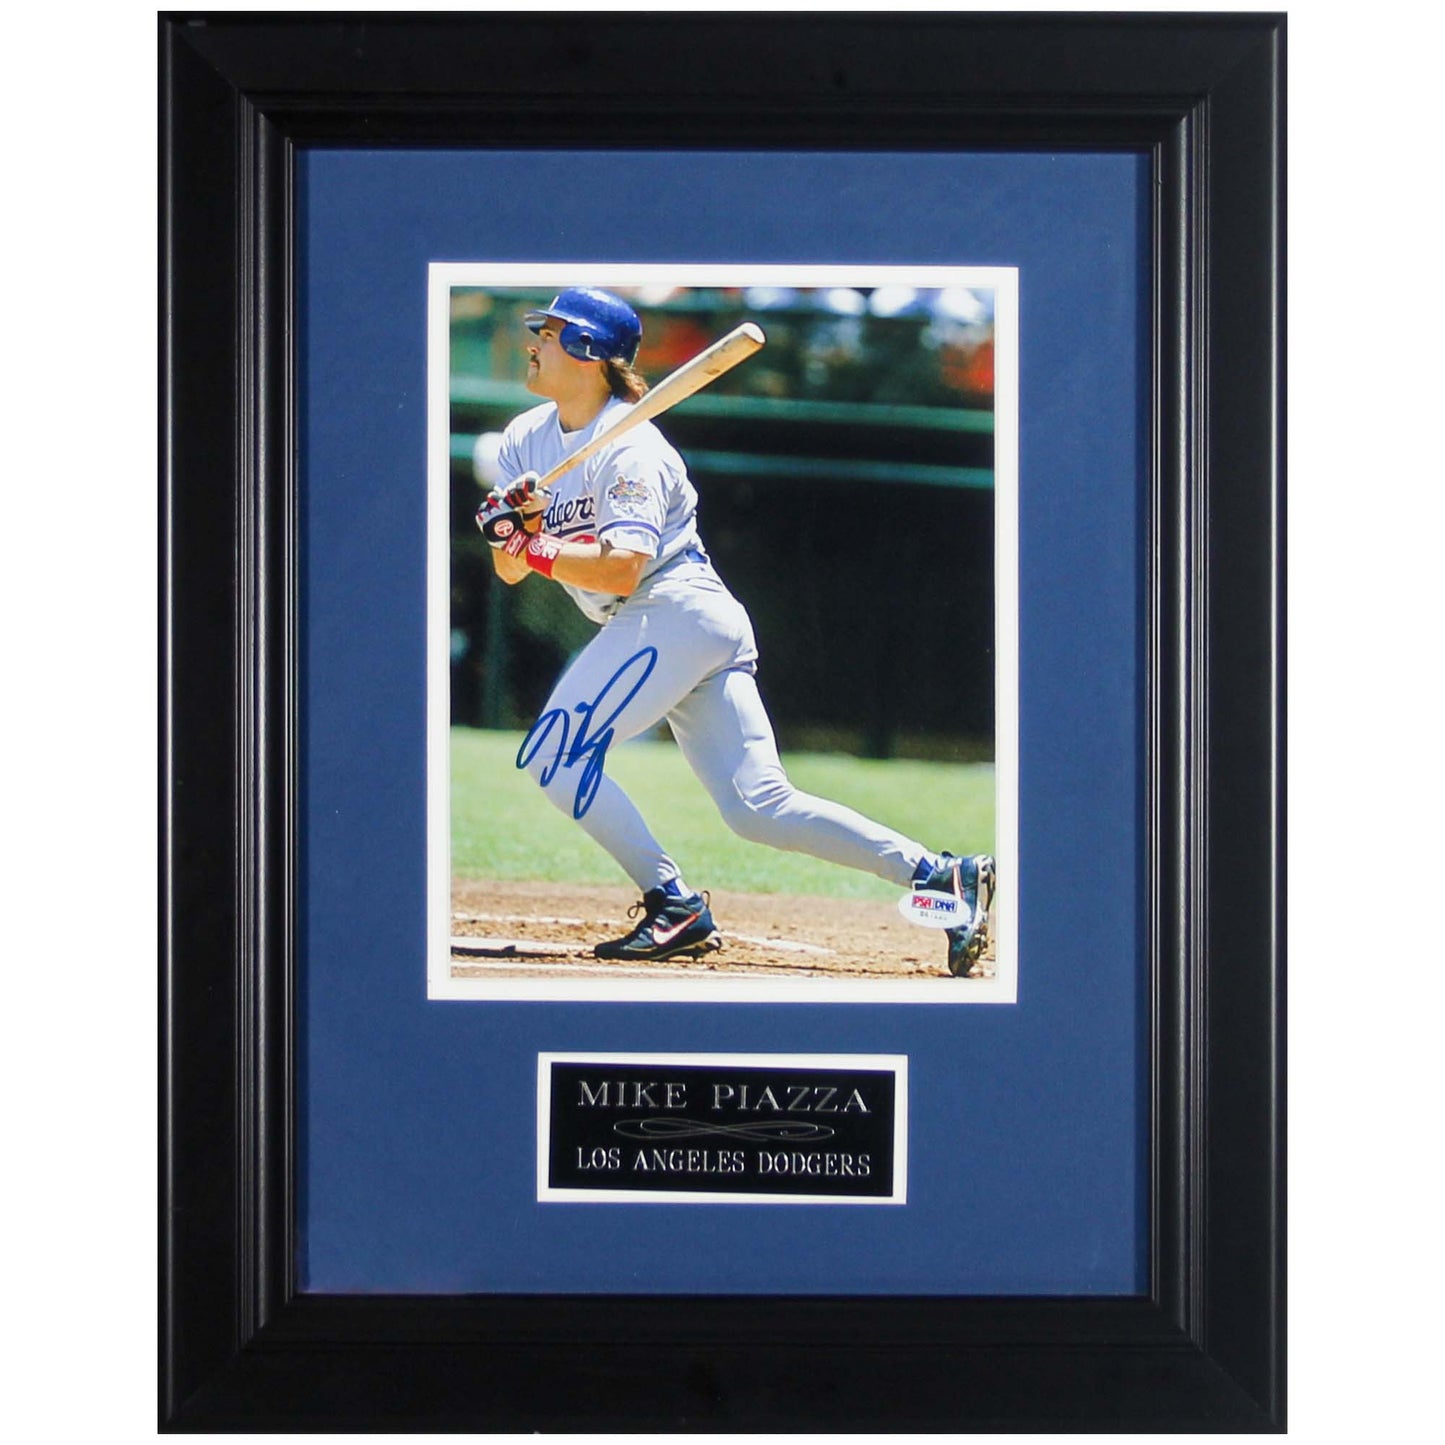 Mike Piazza Signed Photo